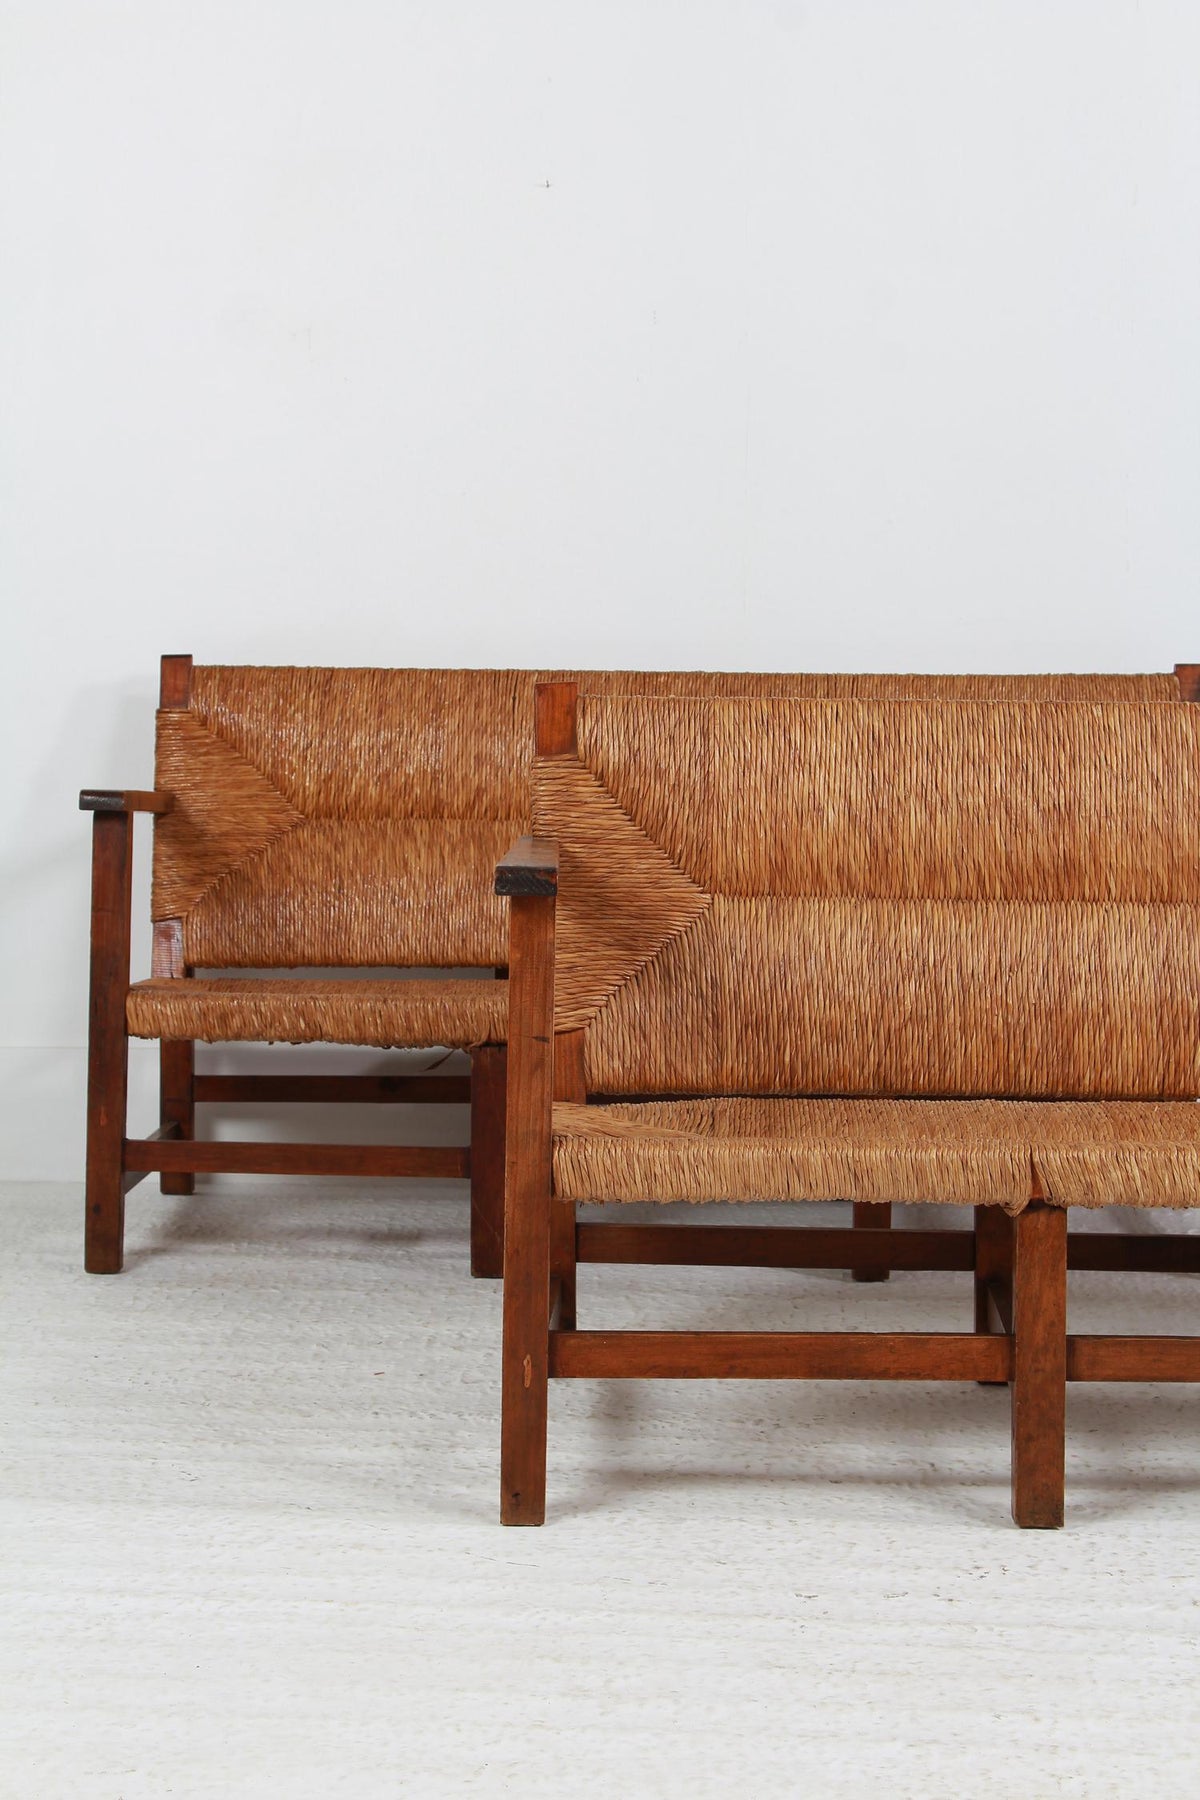 Rare Pair of Spanish Sofa/Benches in Pine and Woven Straw